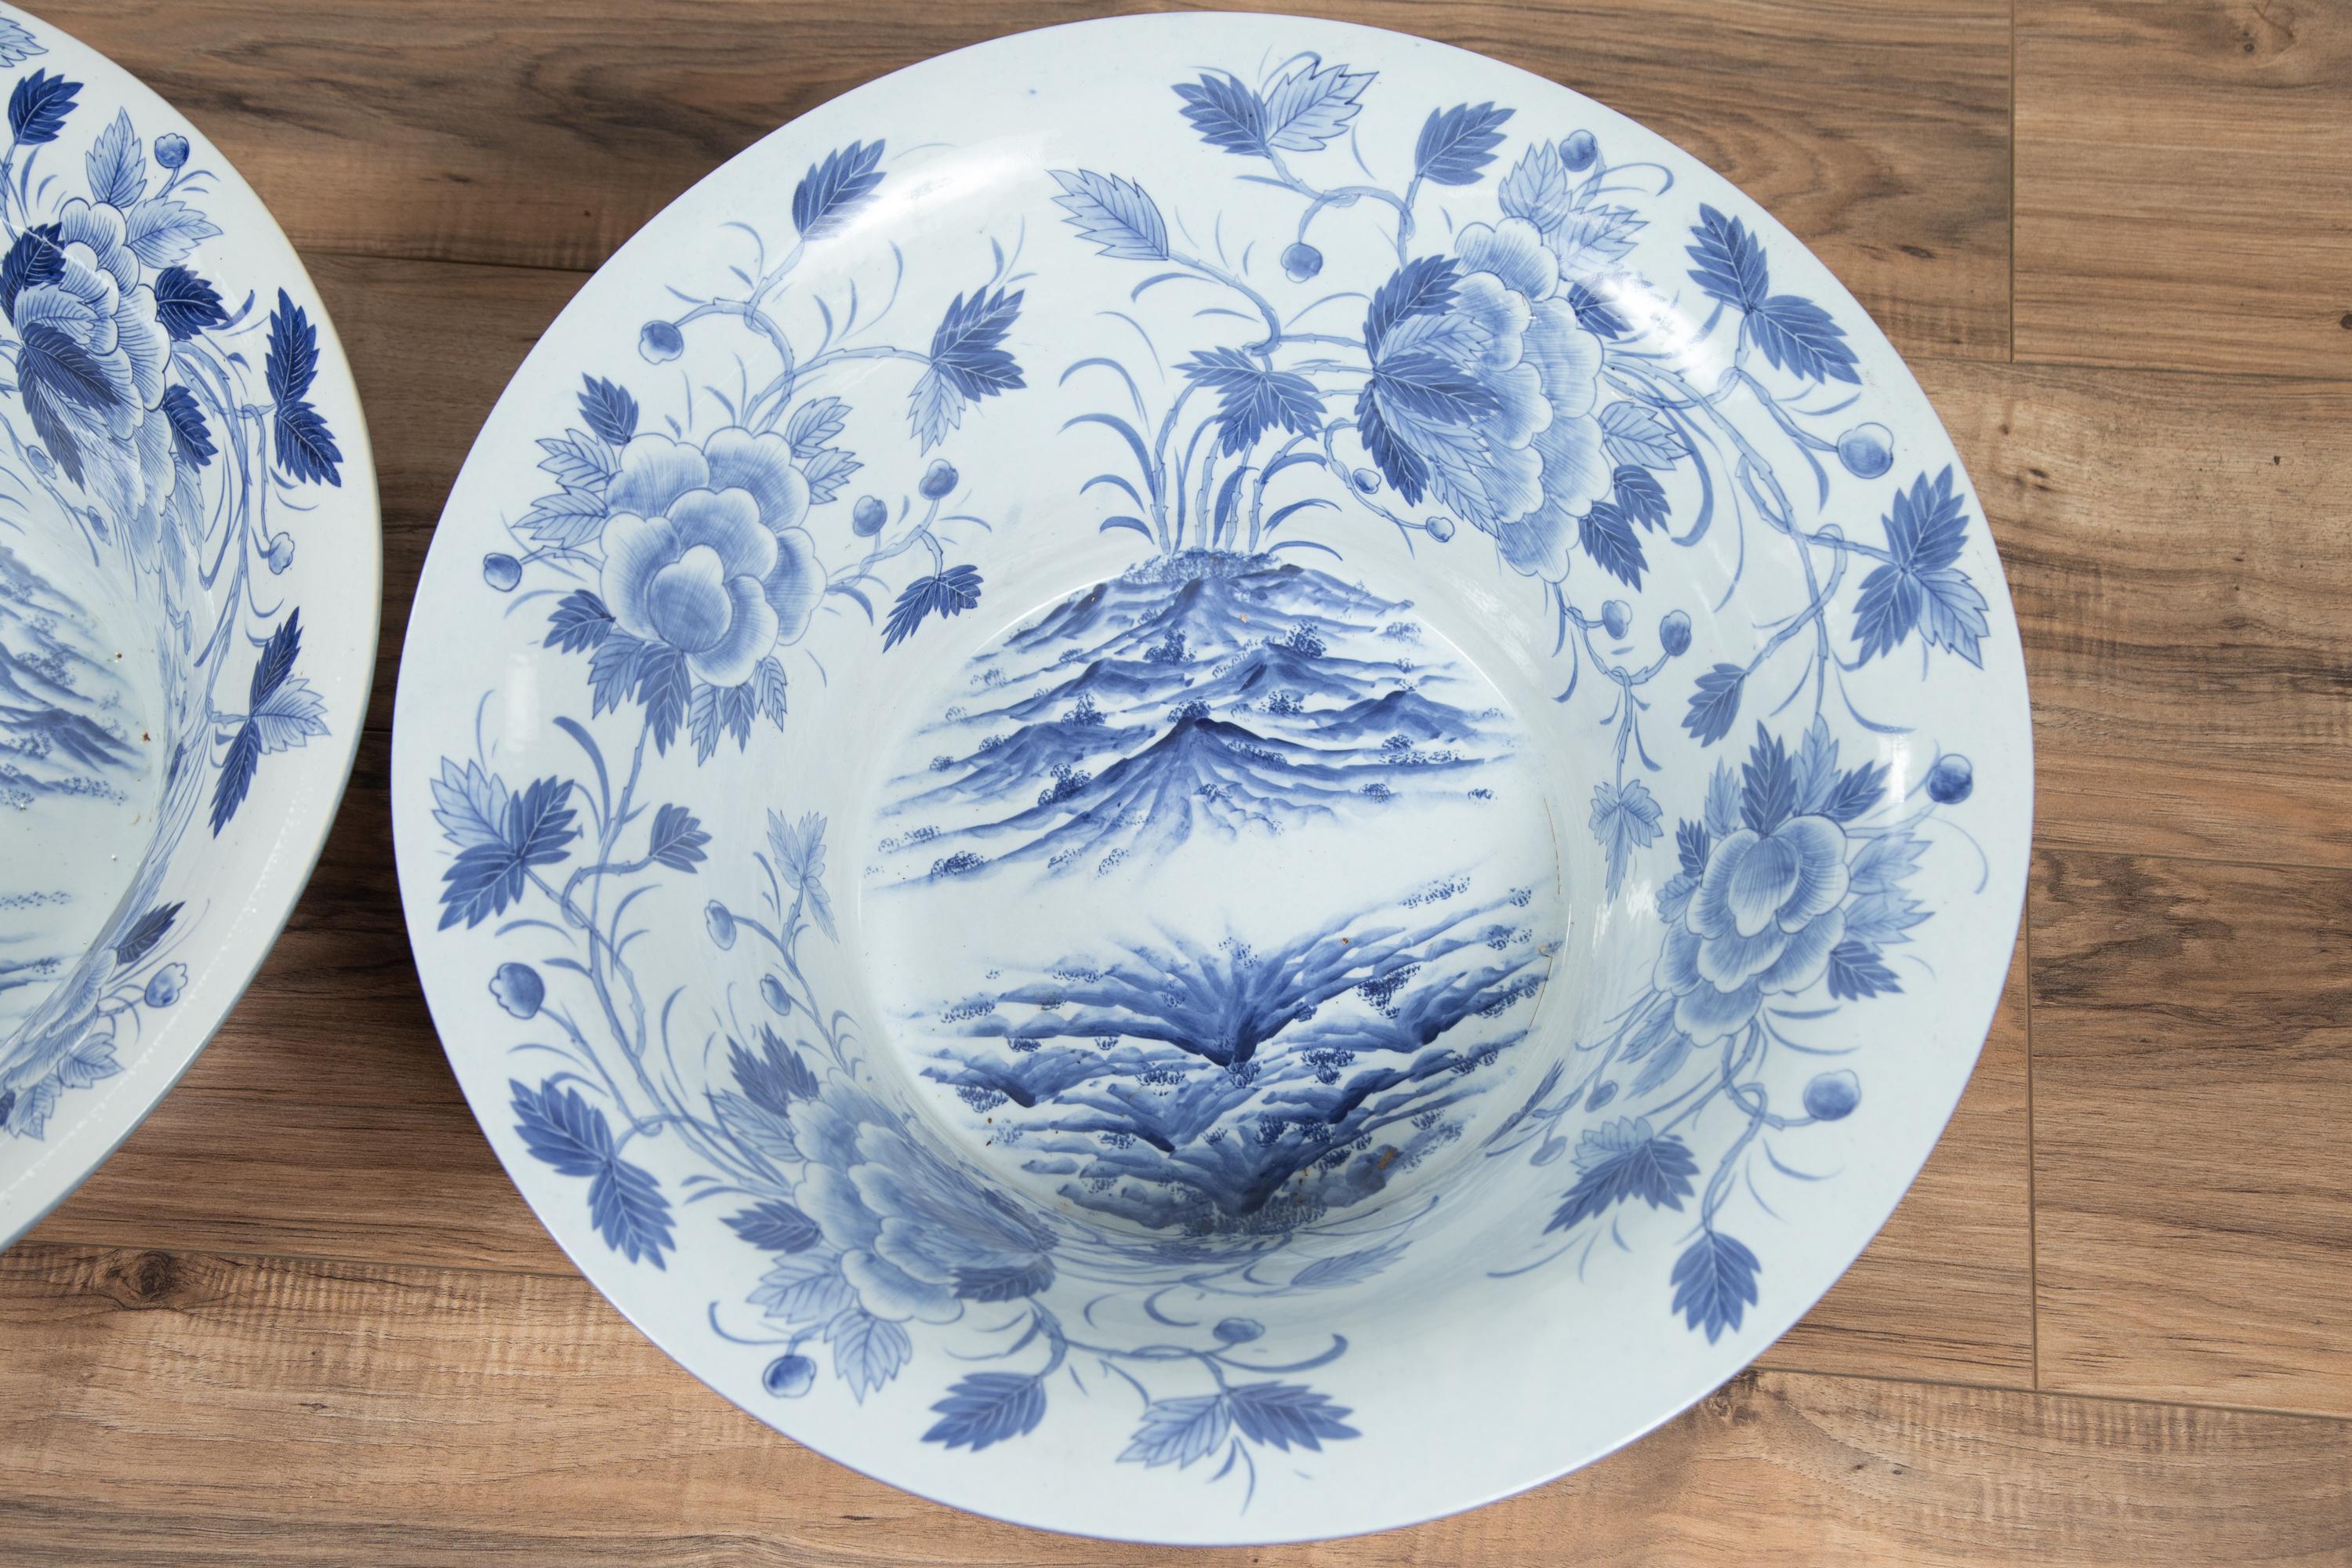 Ceramic Blue and White Porcelain Wash Basin with Cobalt Blue Patina and Floral Motifs For Sale